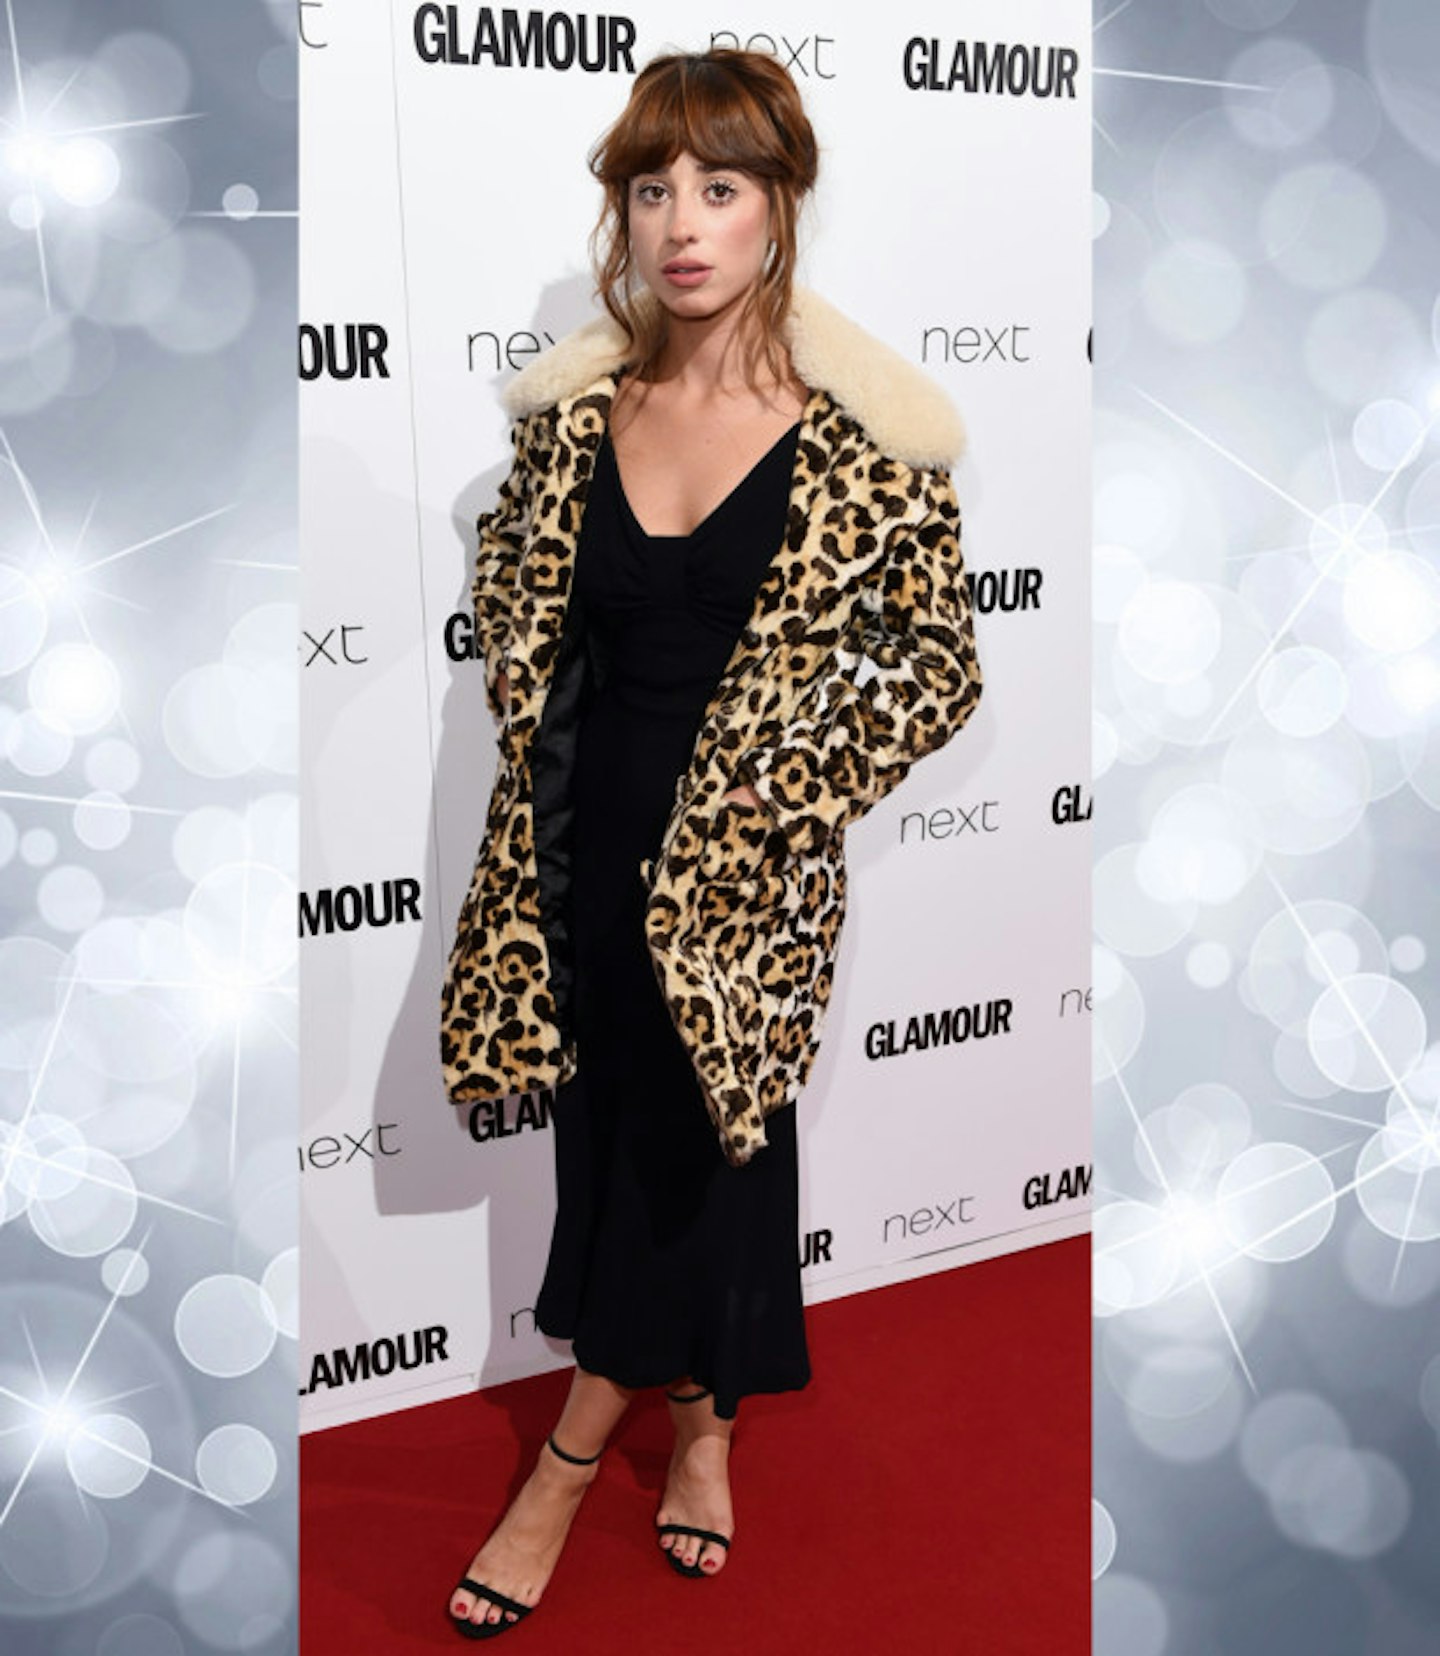 glamour-awards-outfits-foxes-leopard-coat-black-dress